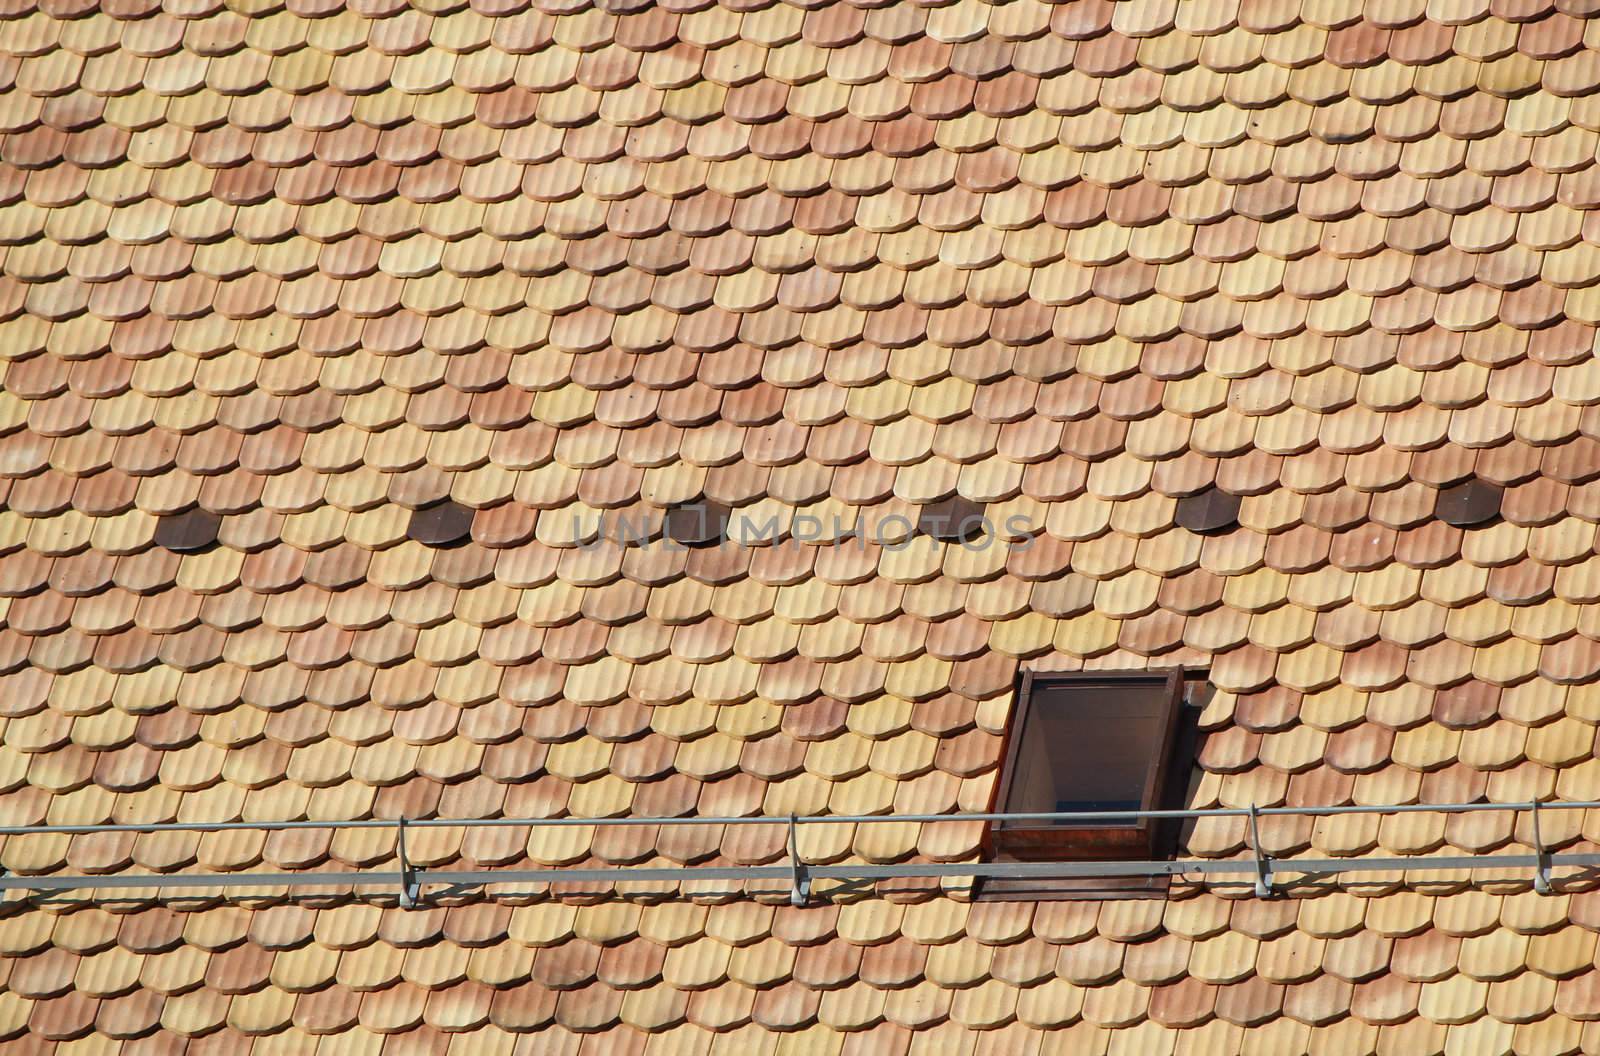 Lots of brown tiles and a window on a roof